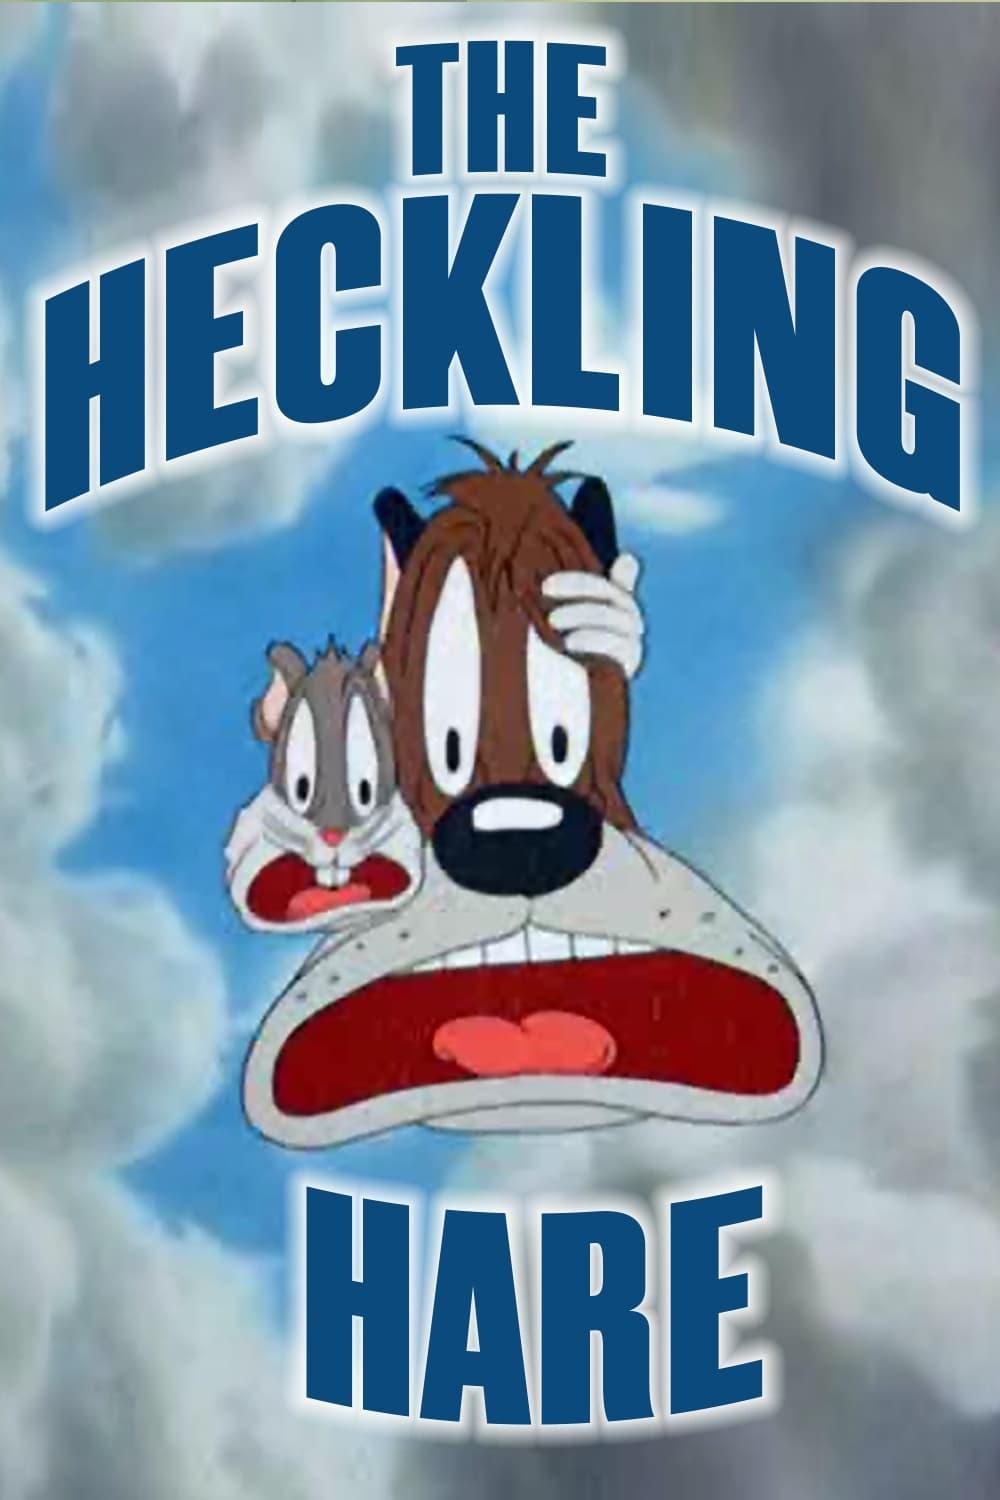 The Heckling Hare poster